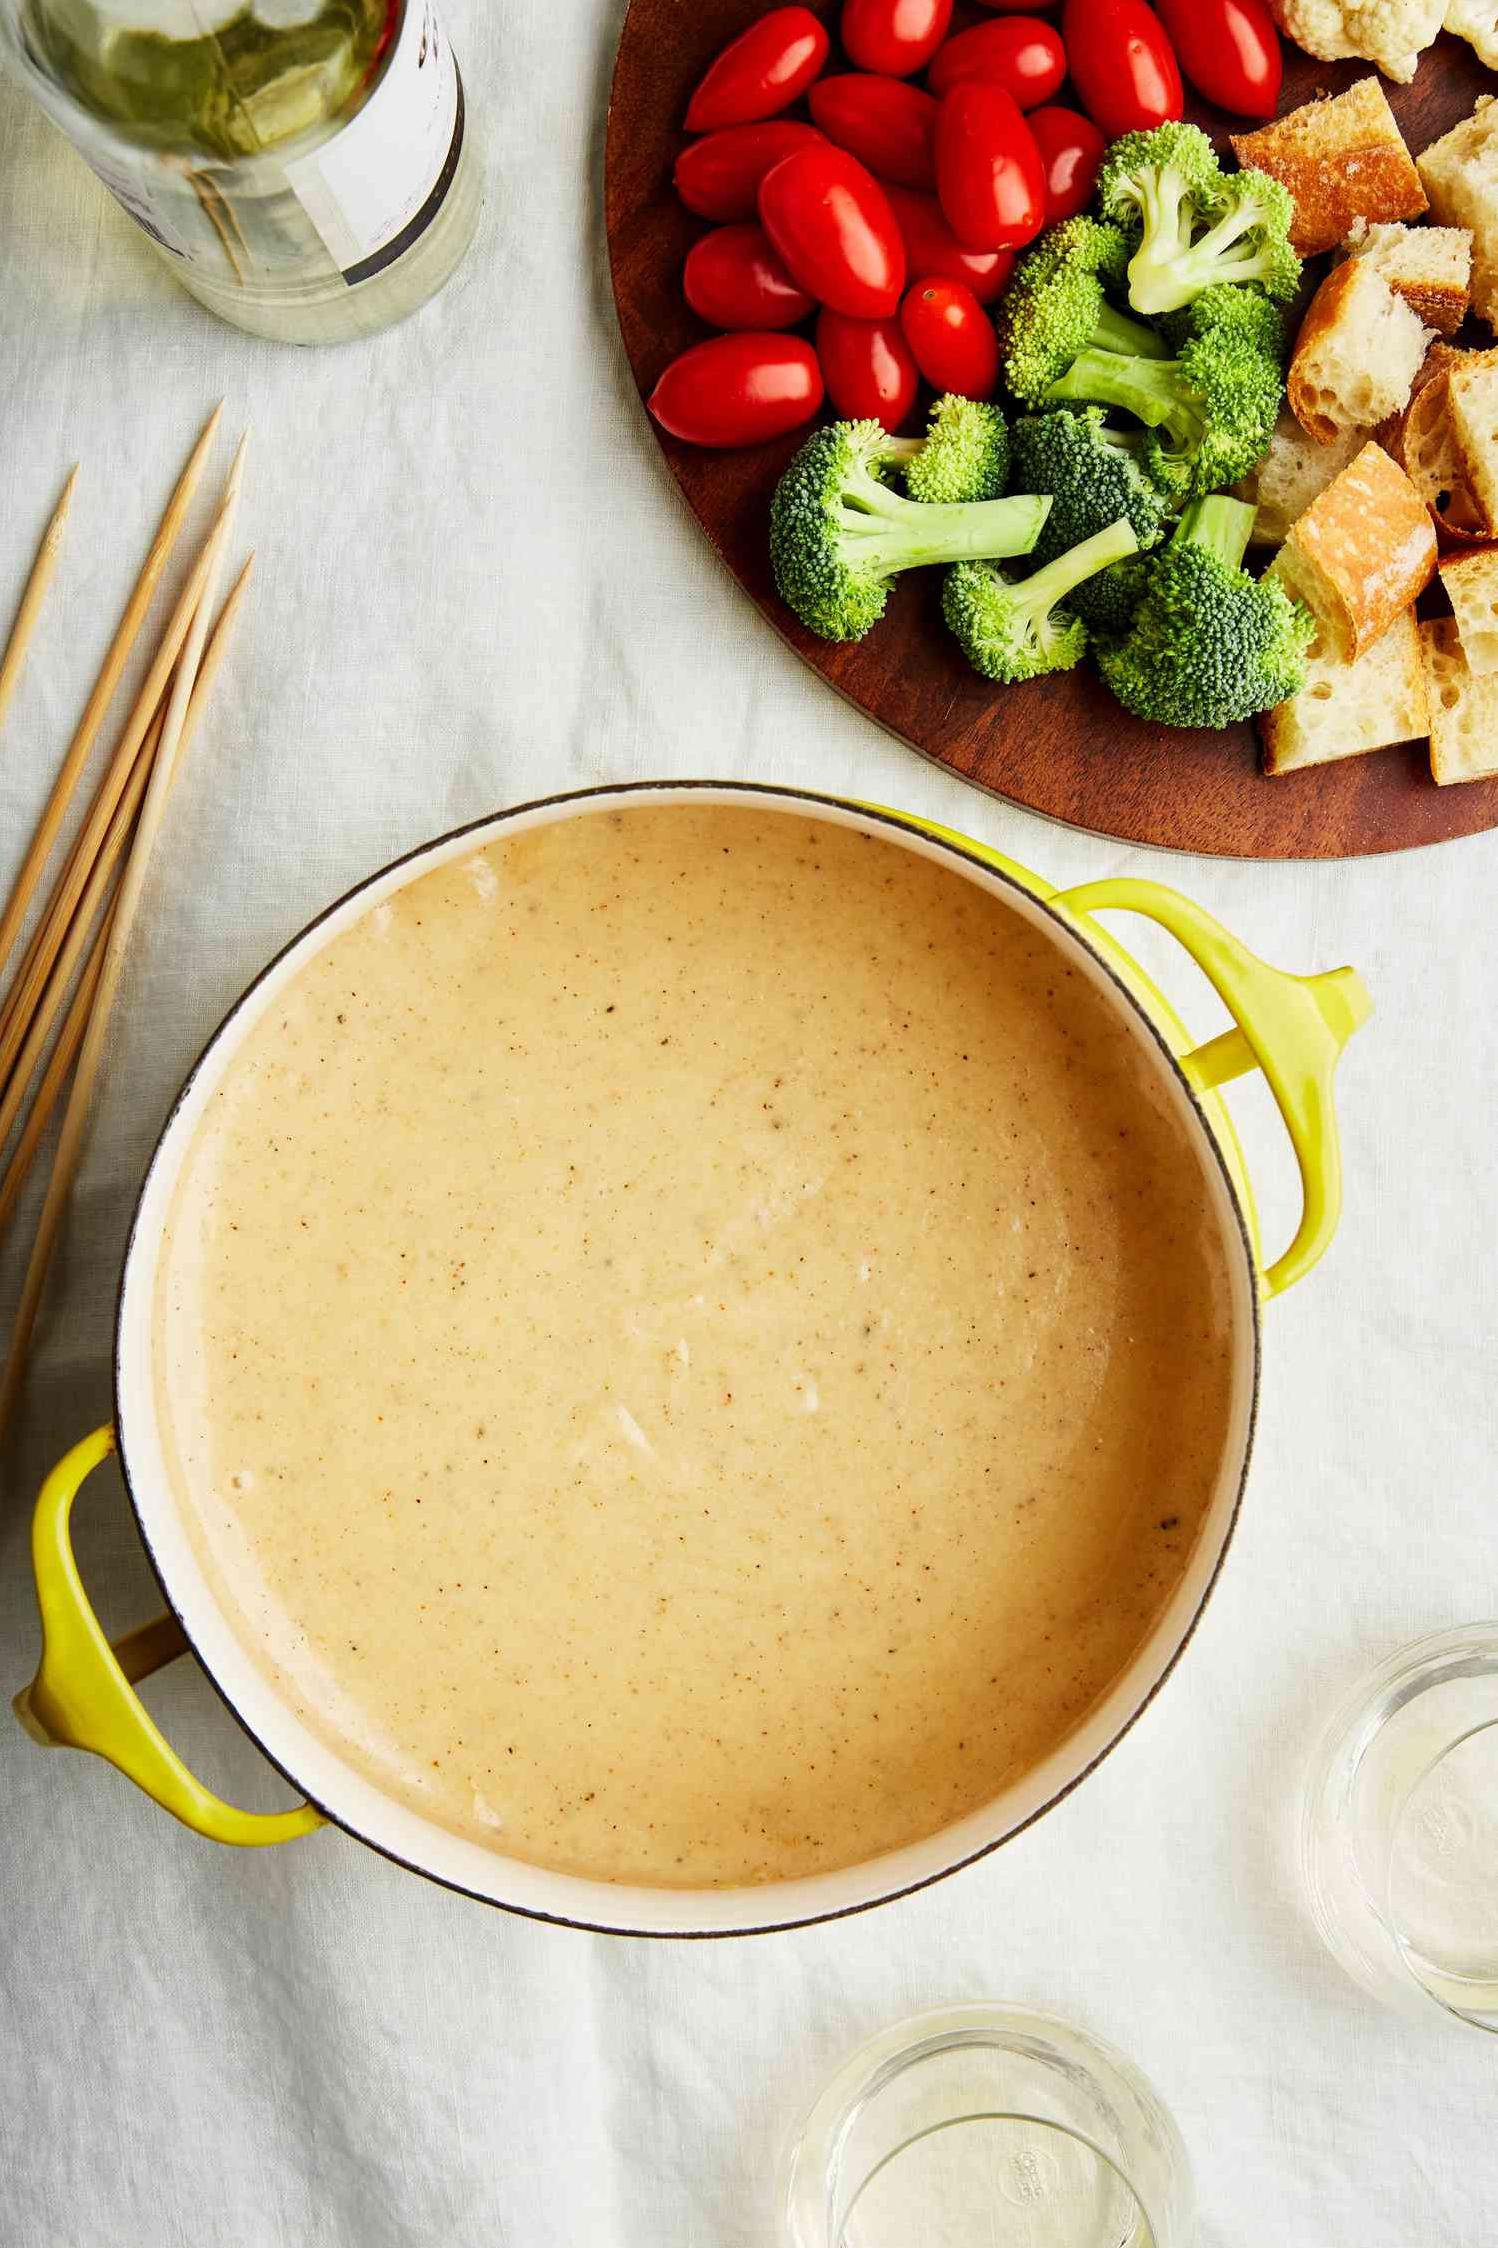  Impress your guests with a gourmet fondue experience